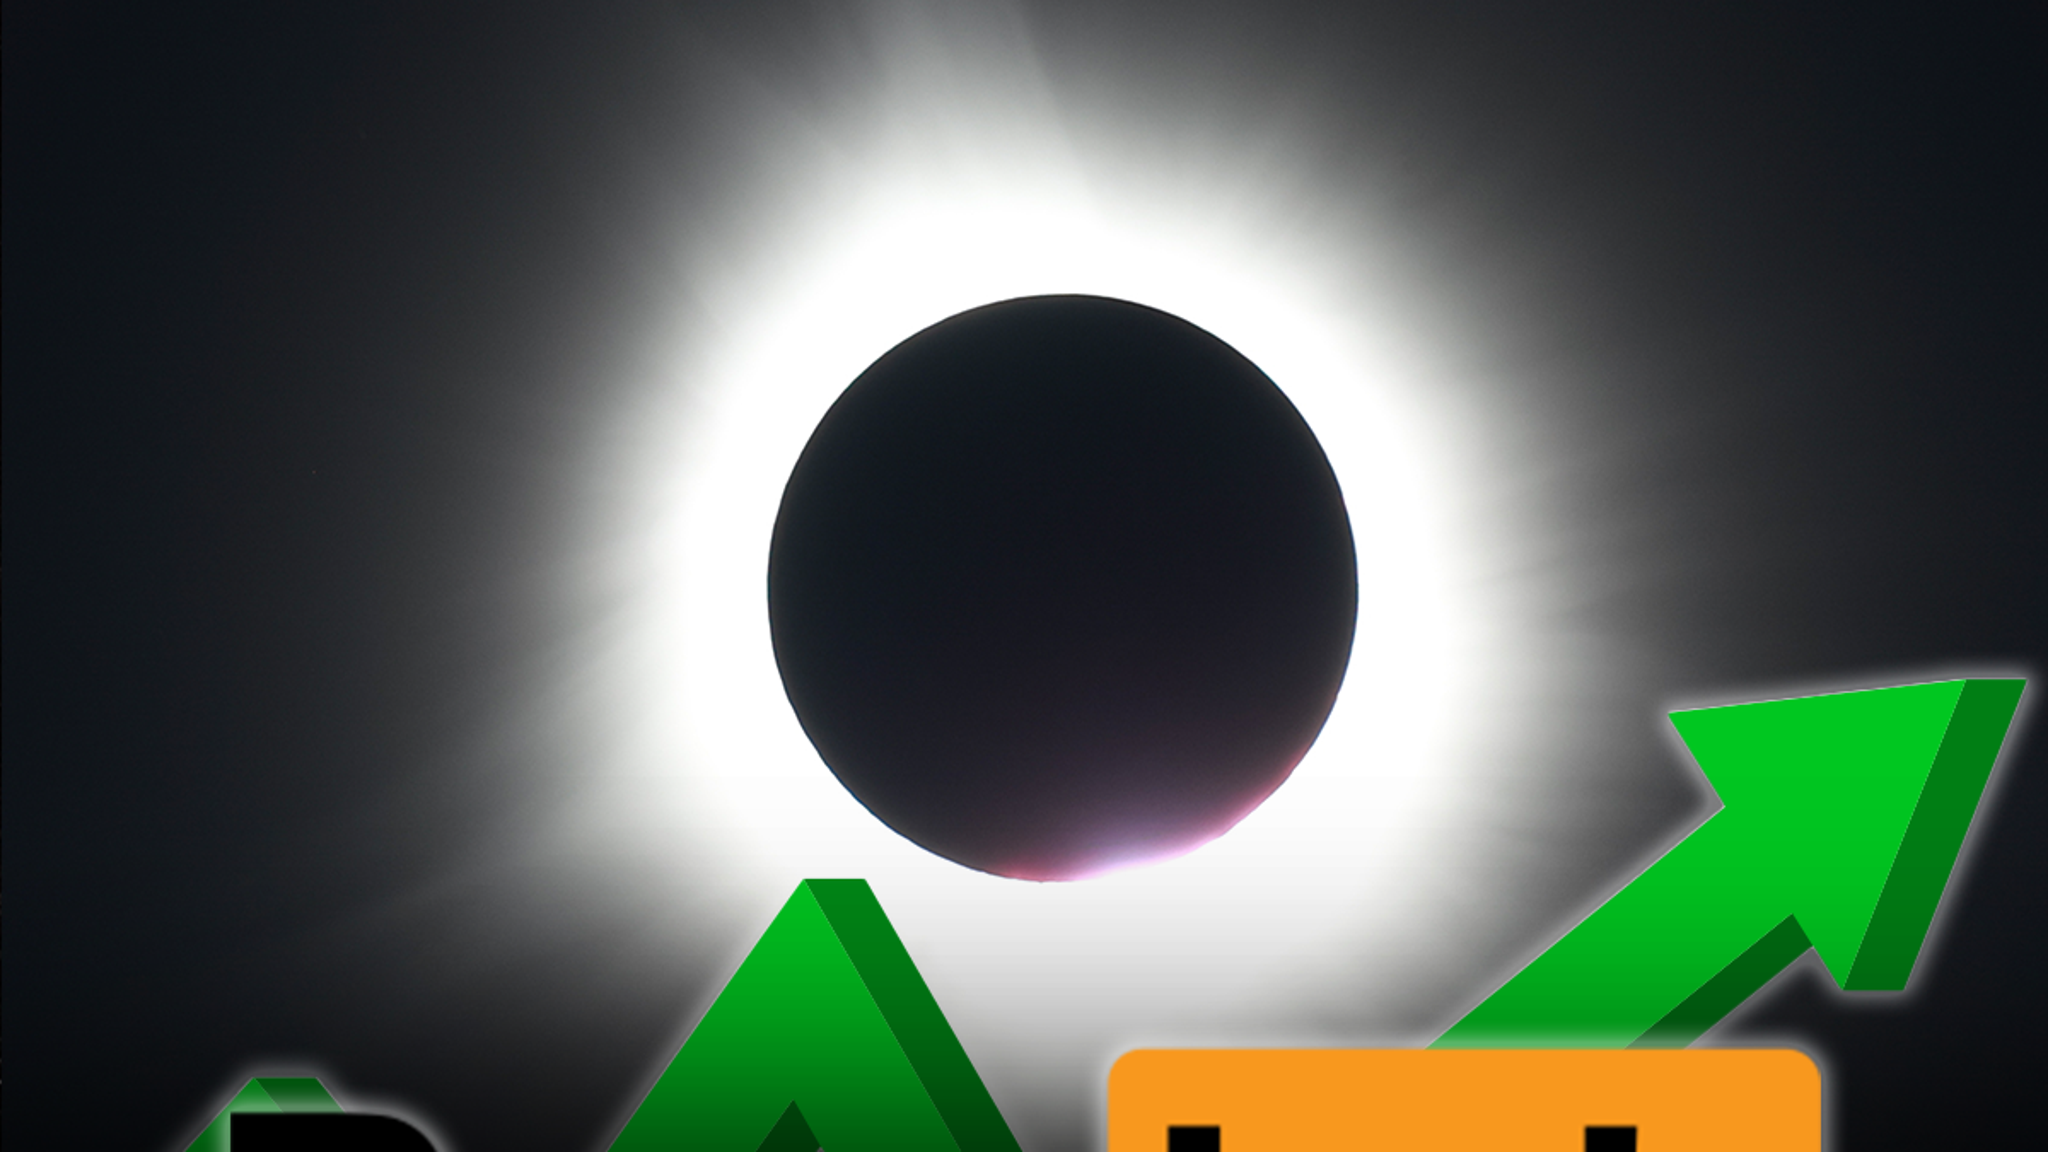 Pornhub Searches For ‘Eclipse’ Skyrocket Amid Total Solar Eclipse